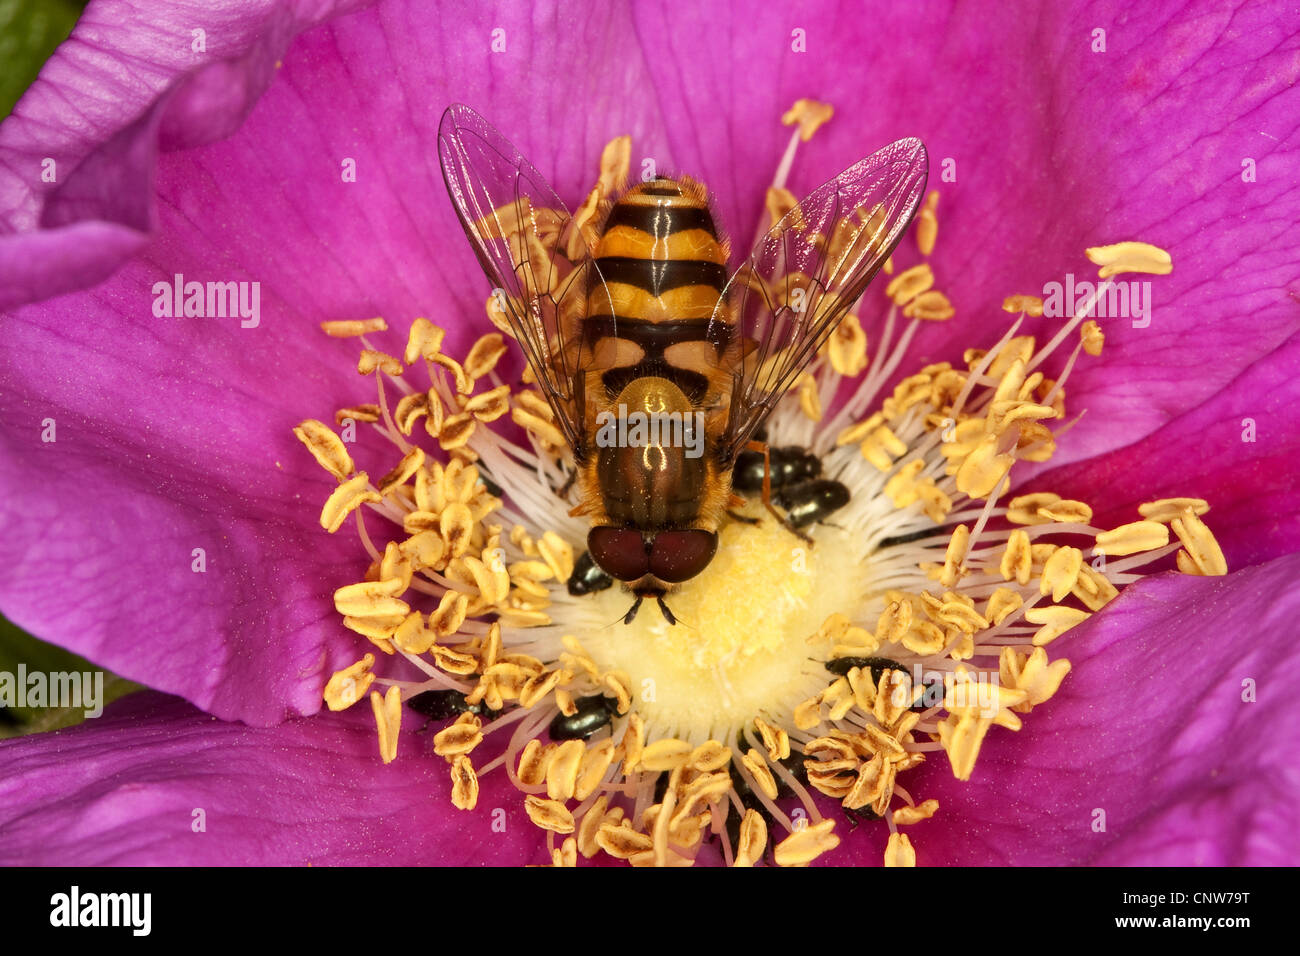 currant hover fly (Syrphus spec), male on flower, Germany Stock Photo